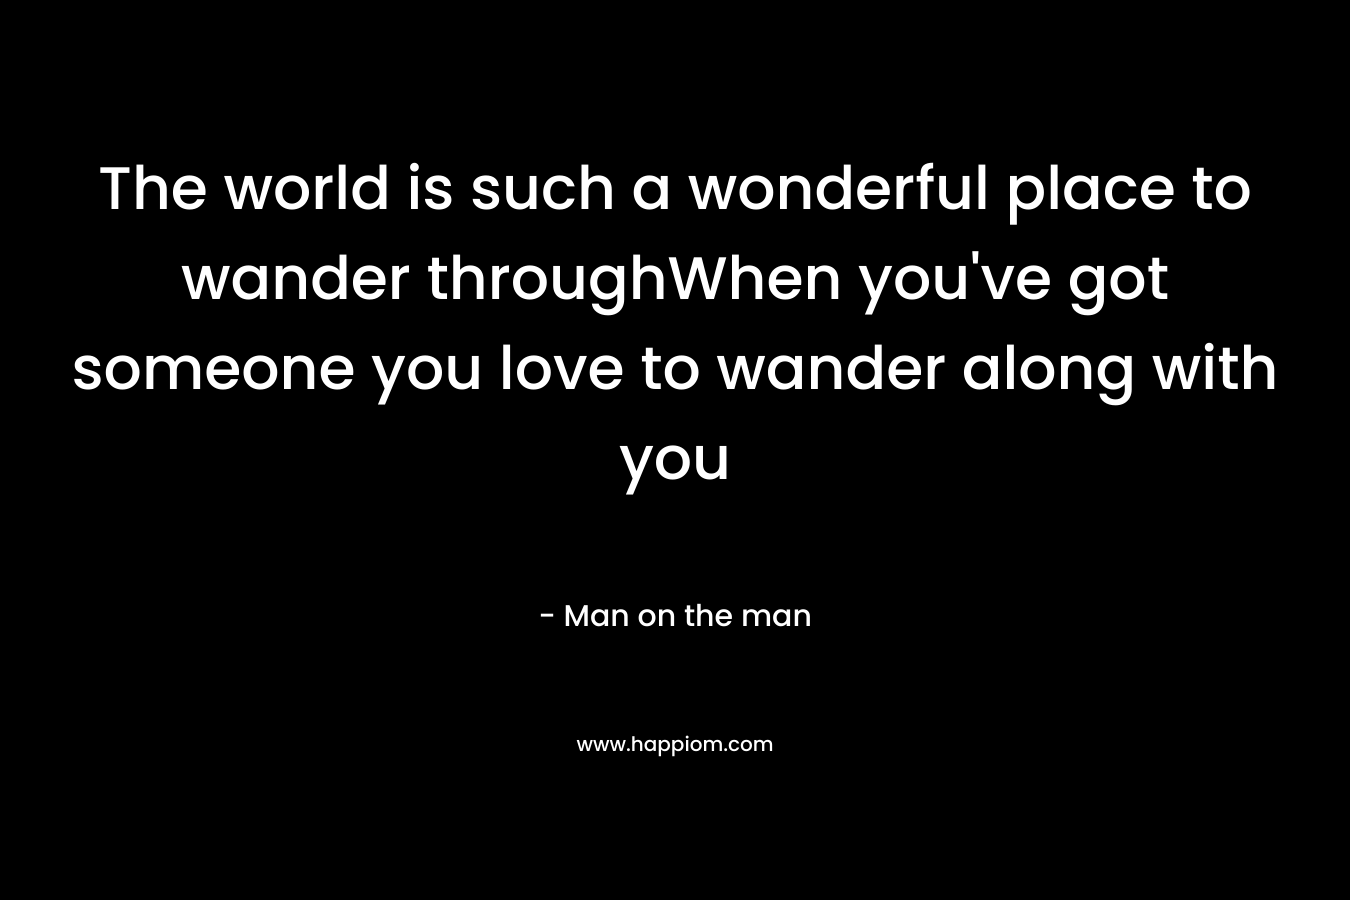 The world is such a wonderful place to wander throughWhen you’ve got someone you love to wander along with you – Man on the man